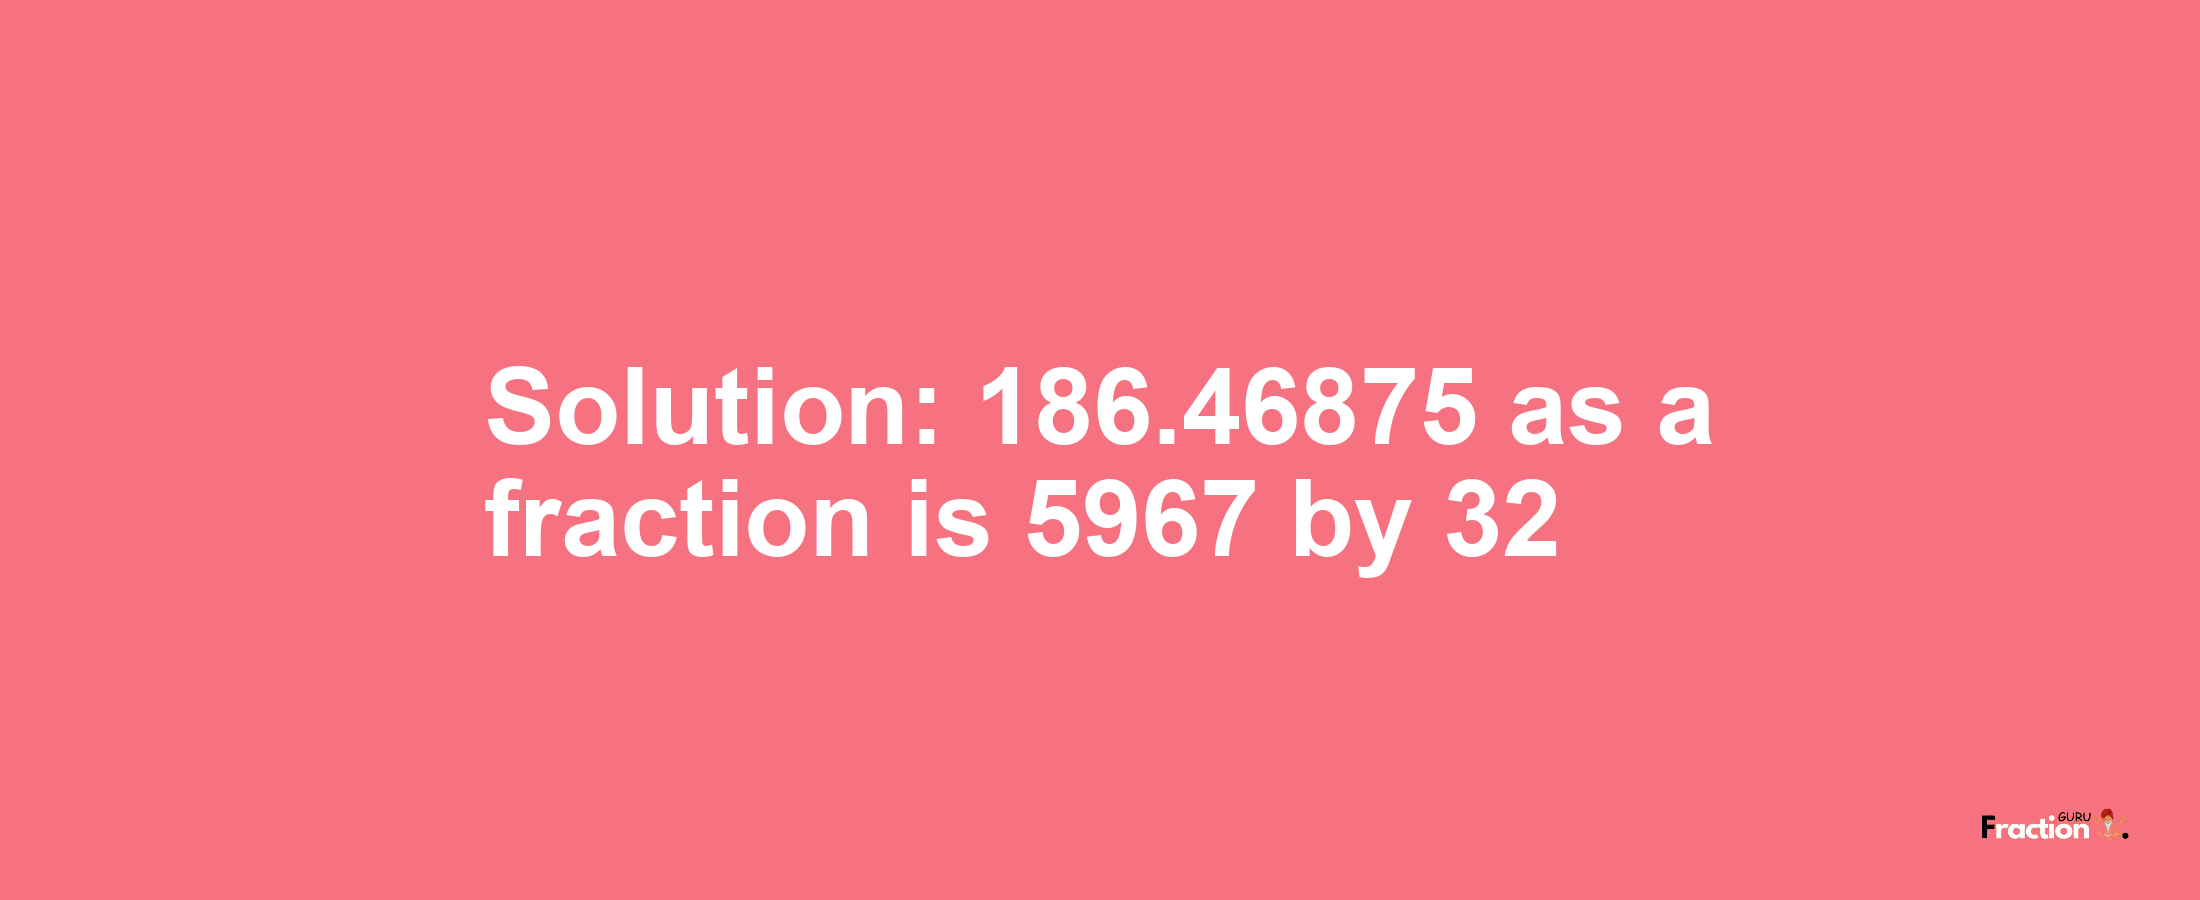 Solution:186.46875 as a fraction is 5967/32